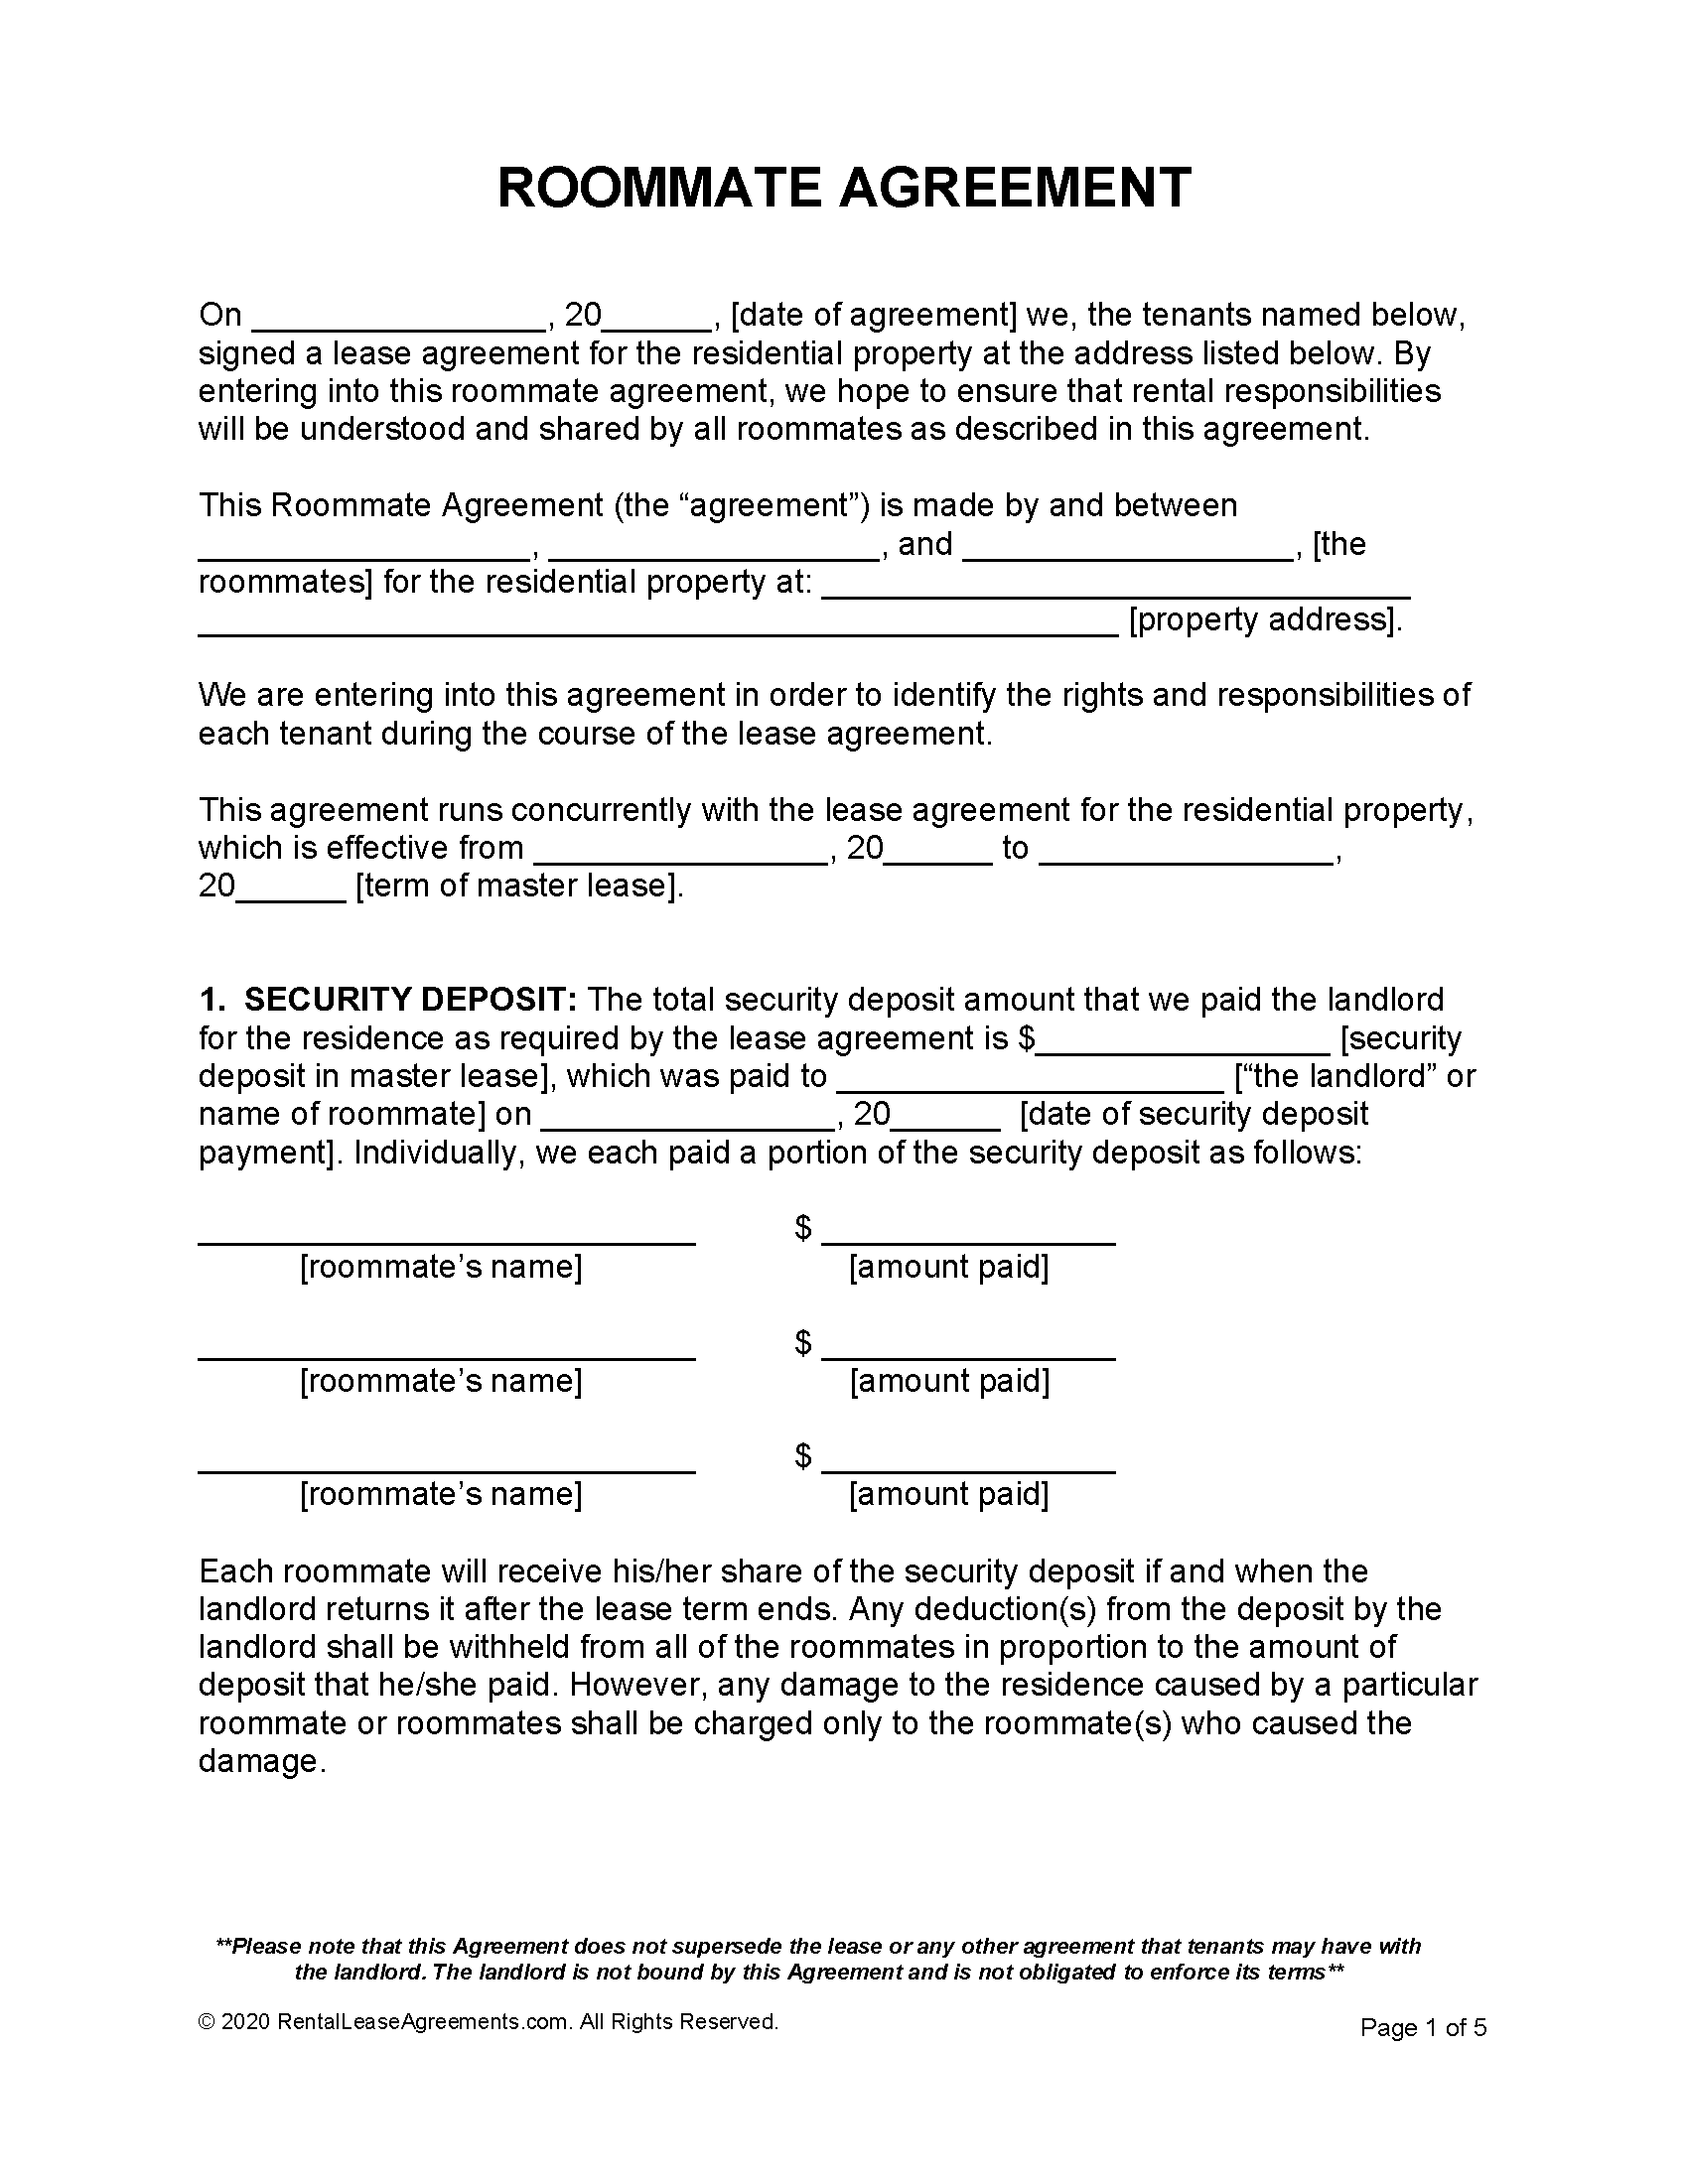 Free Roommate Agreement Template  PDF - Word Intended For bedroom rental agreement template